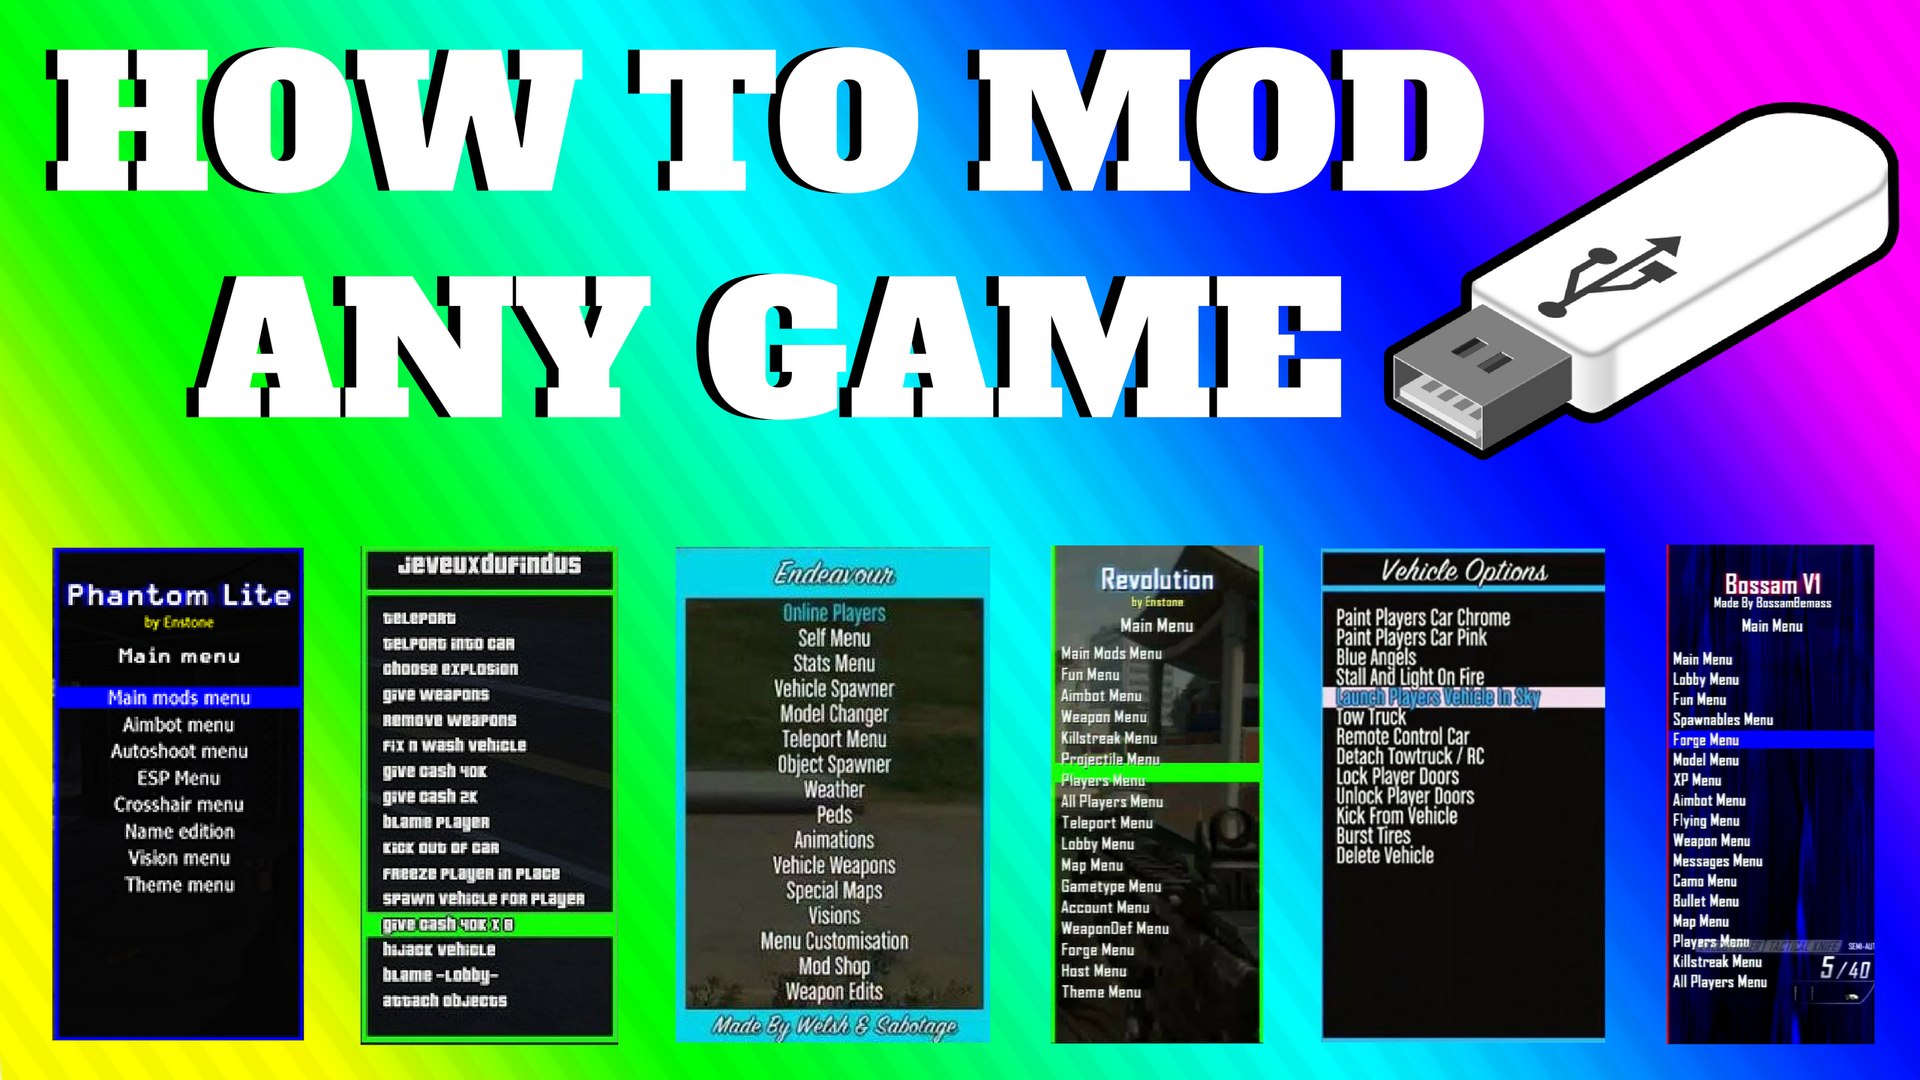 GTA 5 ONLINE: HOW TO INSTALL MOD MENUS ON XBOX ONE AND XBOX SERIES